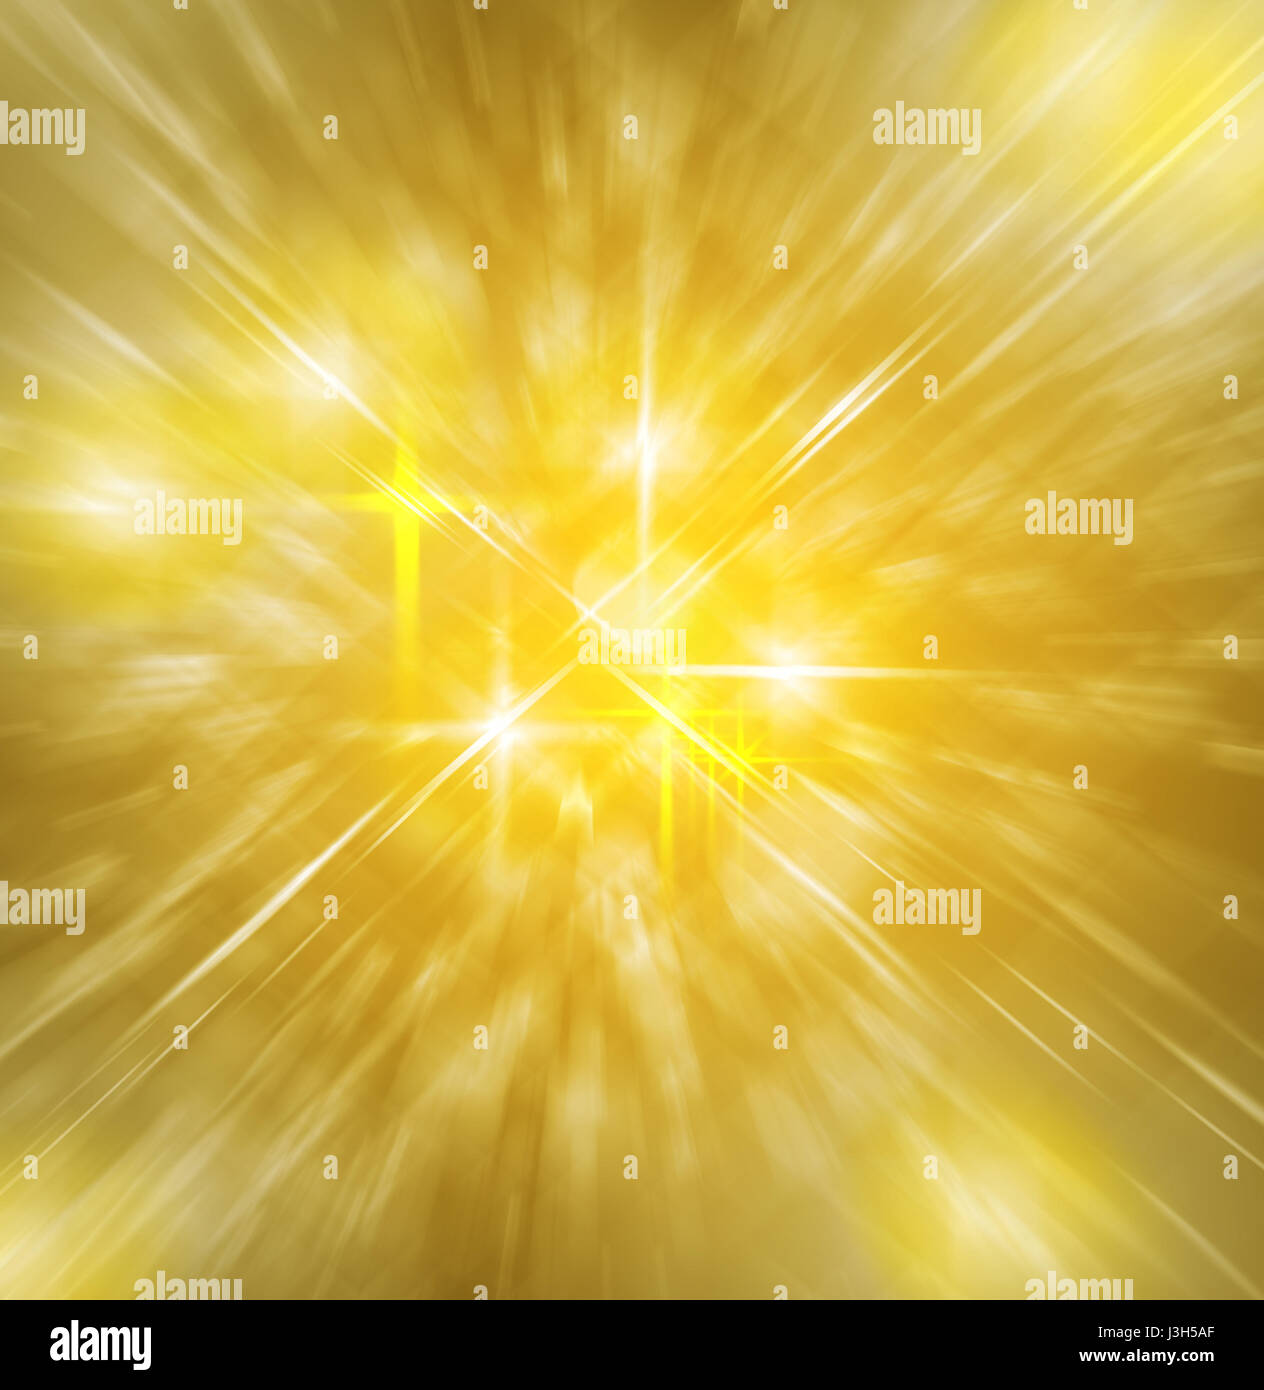 Background of golden divine light with crosses and stars Stock Photo - Alamy